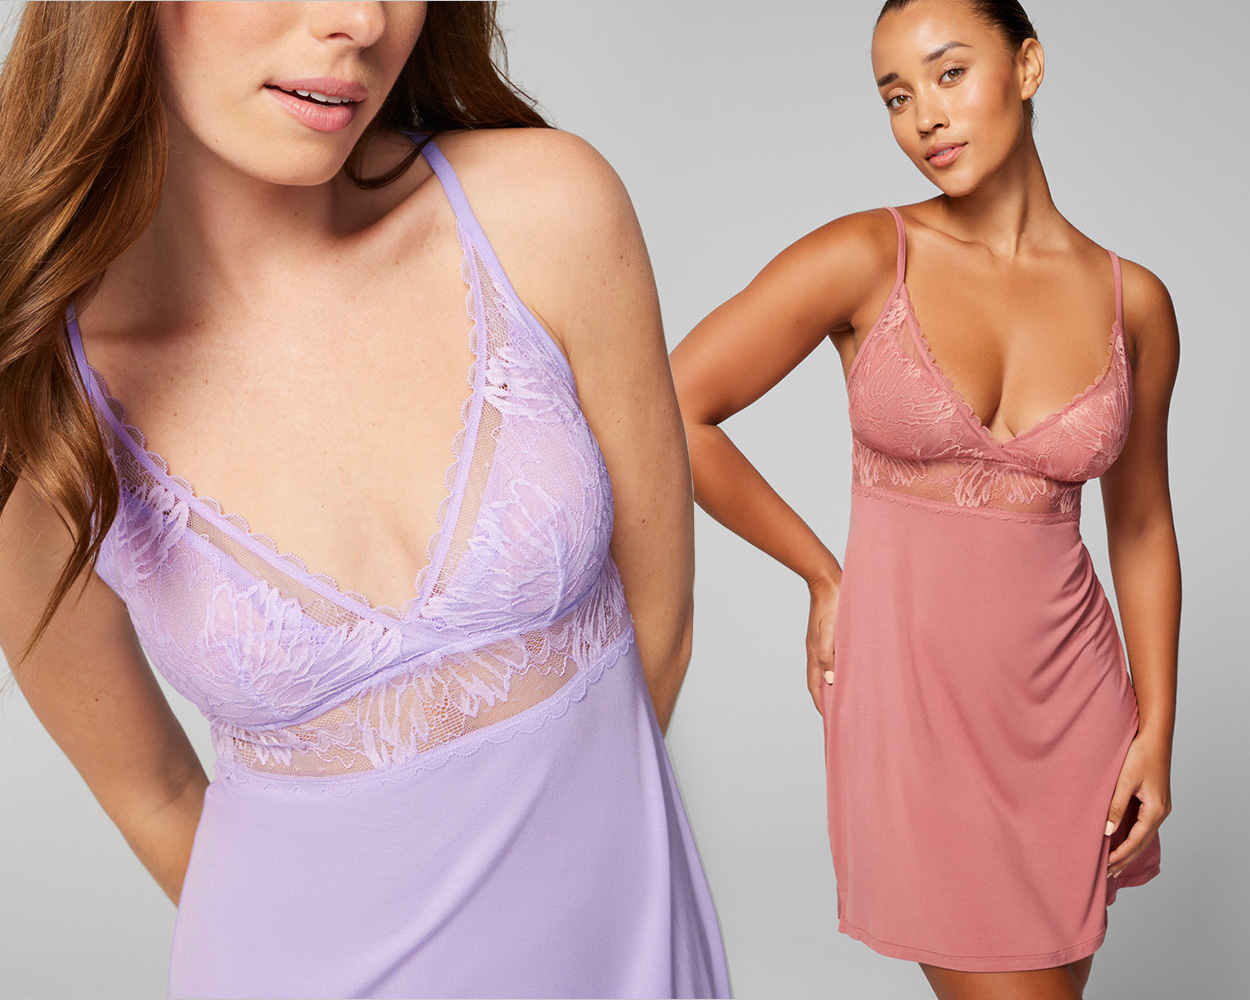 Soma<sup class=st-superscript>®</sup> model wearing purple sheer lace-trimmed chemise and different model wearing same chemise in dark pink.